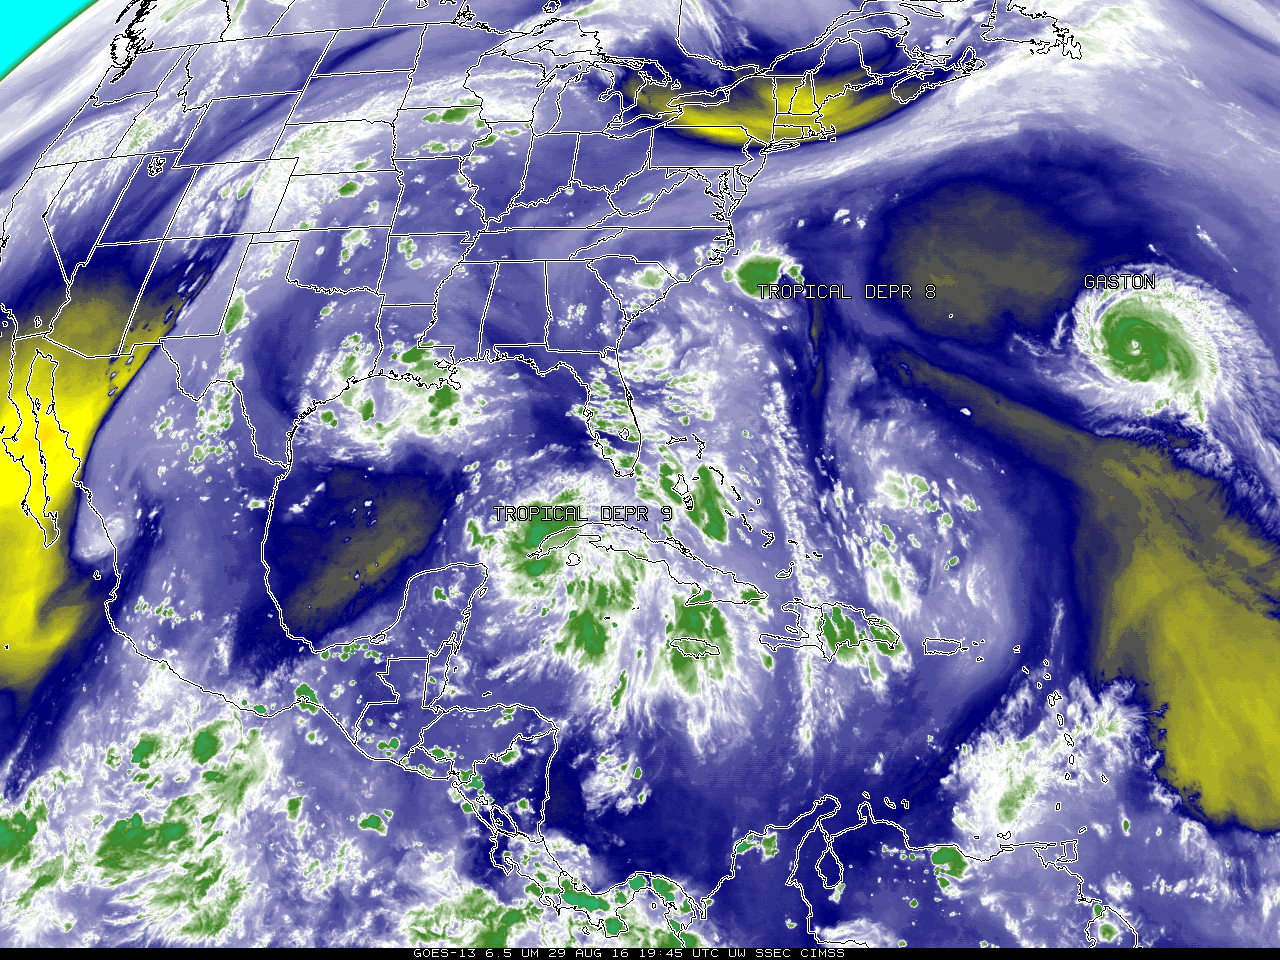 GOES-13 Water Vapor Infrared (6.5 µm) Imagery, 2345 UTC 23 August - 1945 UTC 29 August [click to animate]